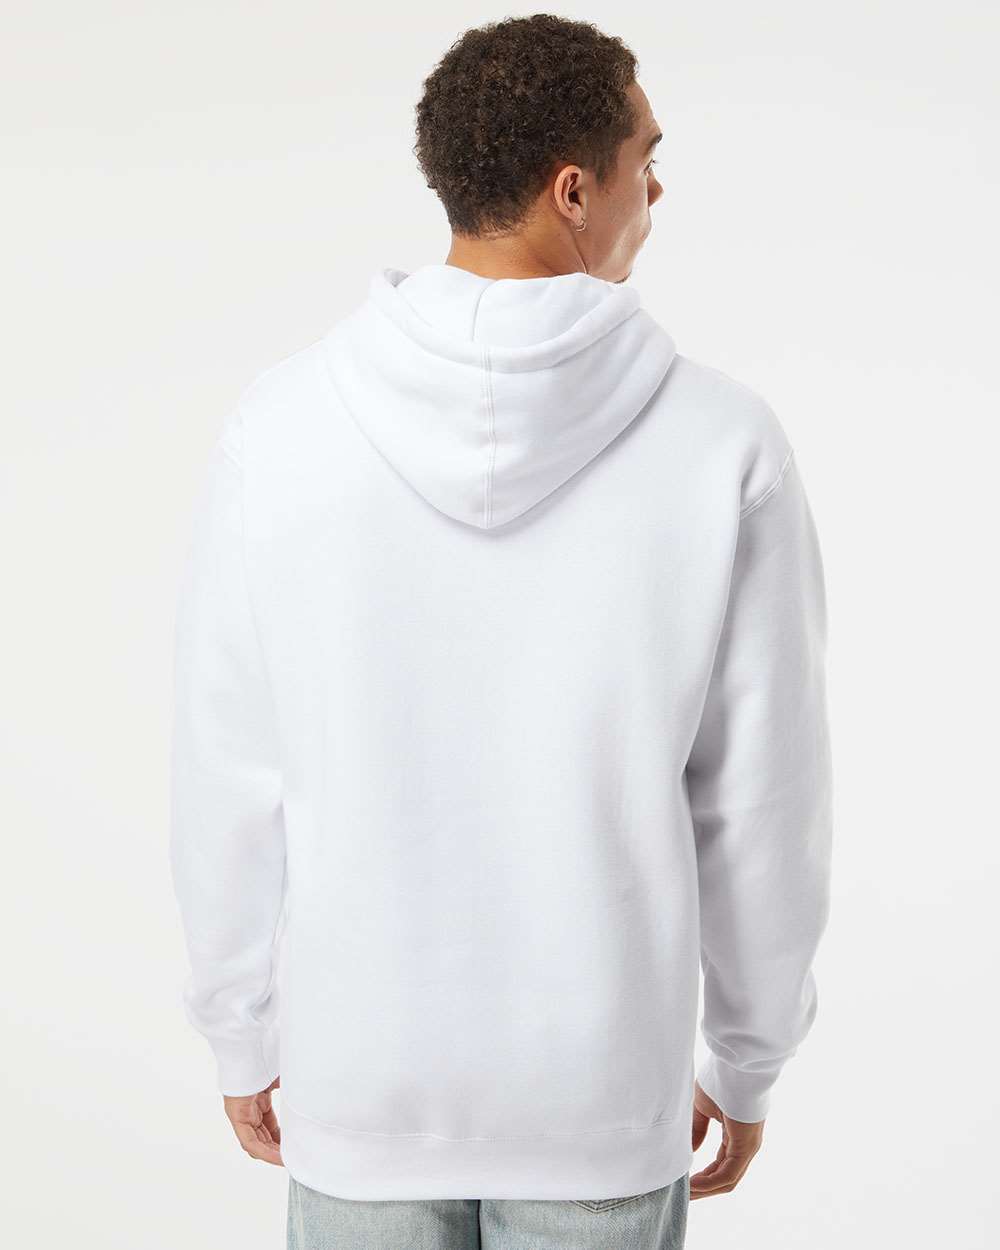 Independent Trading Co. - Heavyweight Hooded Sweatshirt - IND4000-XS - 5XL